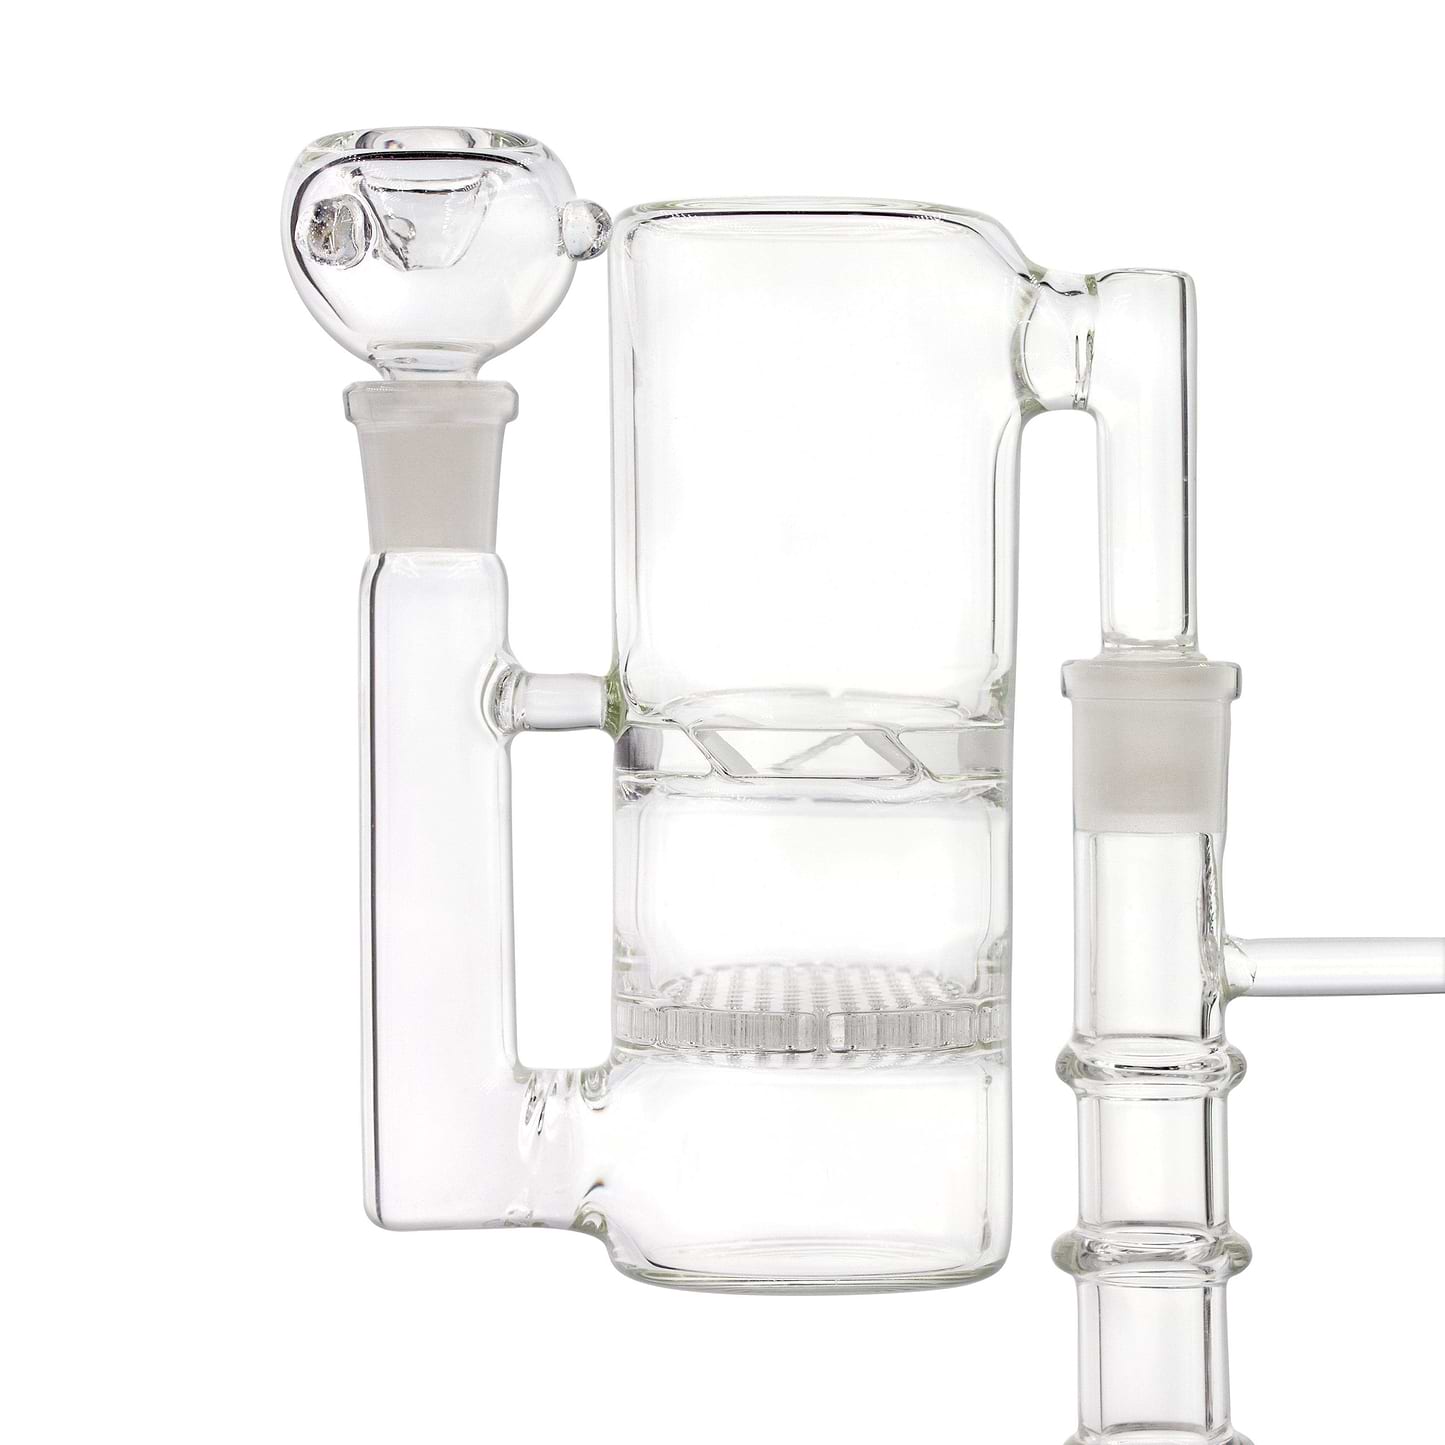 2 stage ash catcher with bowl attached to a bong